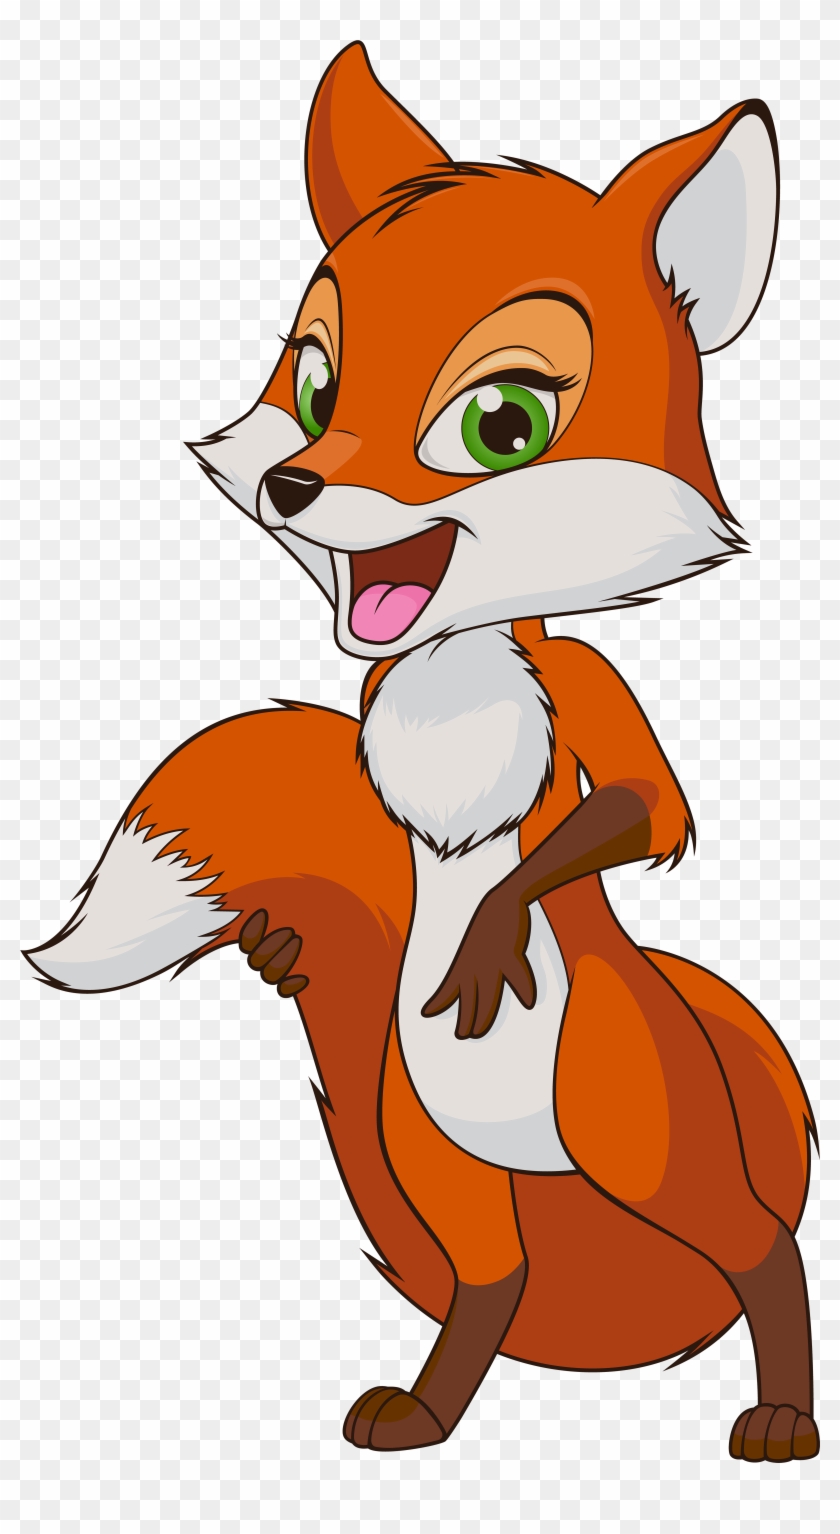 Animal Fox Cartoon - Free Transparent PNG Clipart Images Download